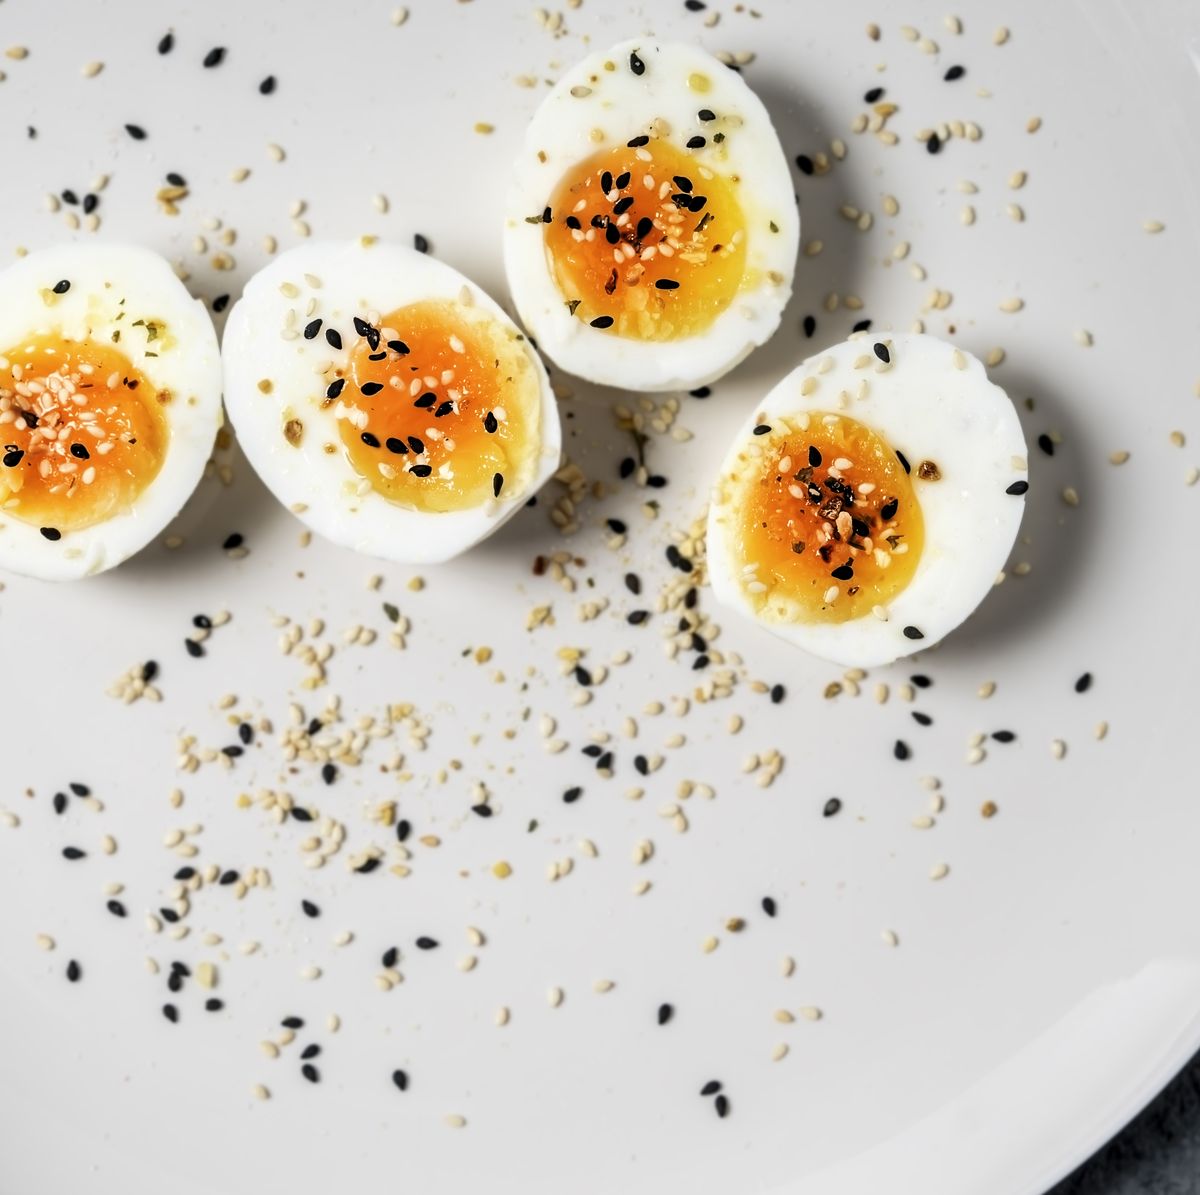 Healthy Eating: How Much Do Eggs Really Weigh?